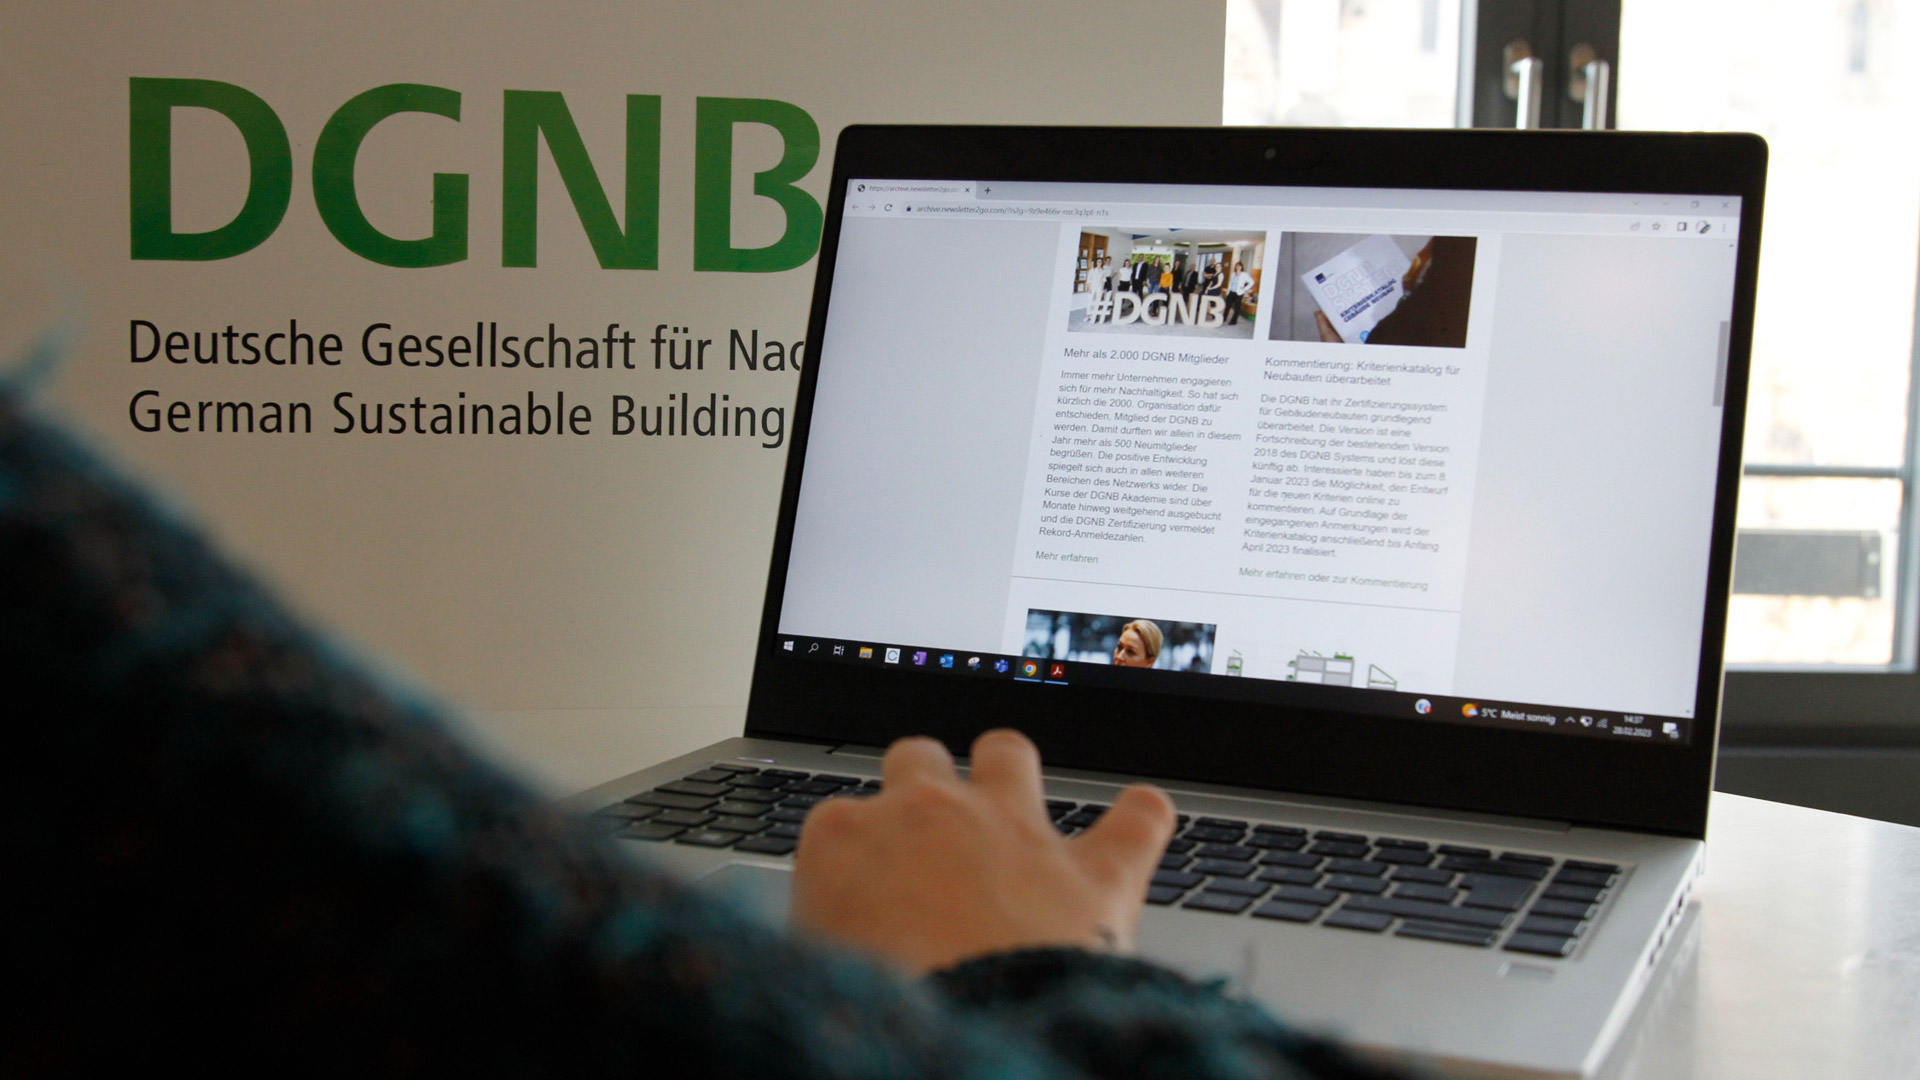 DGNB newsletter on a laptop on a white high table with DGNB logo in the background